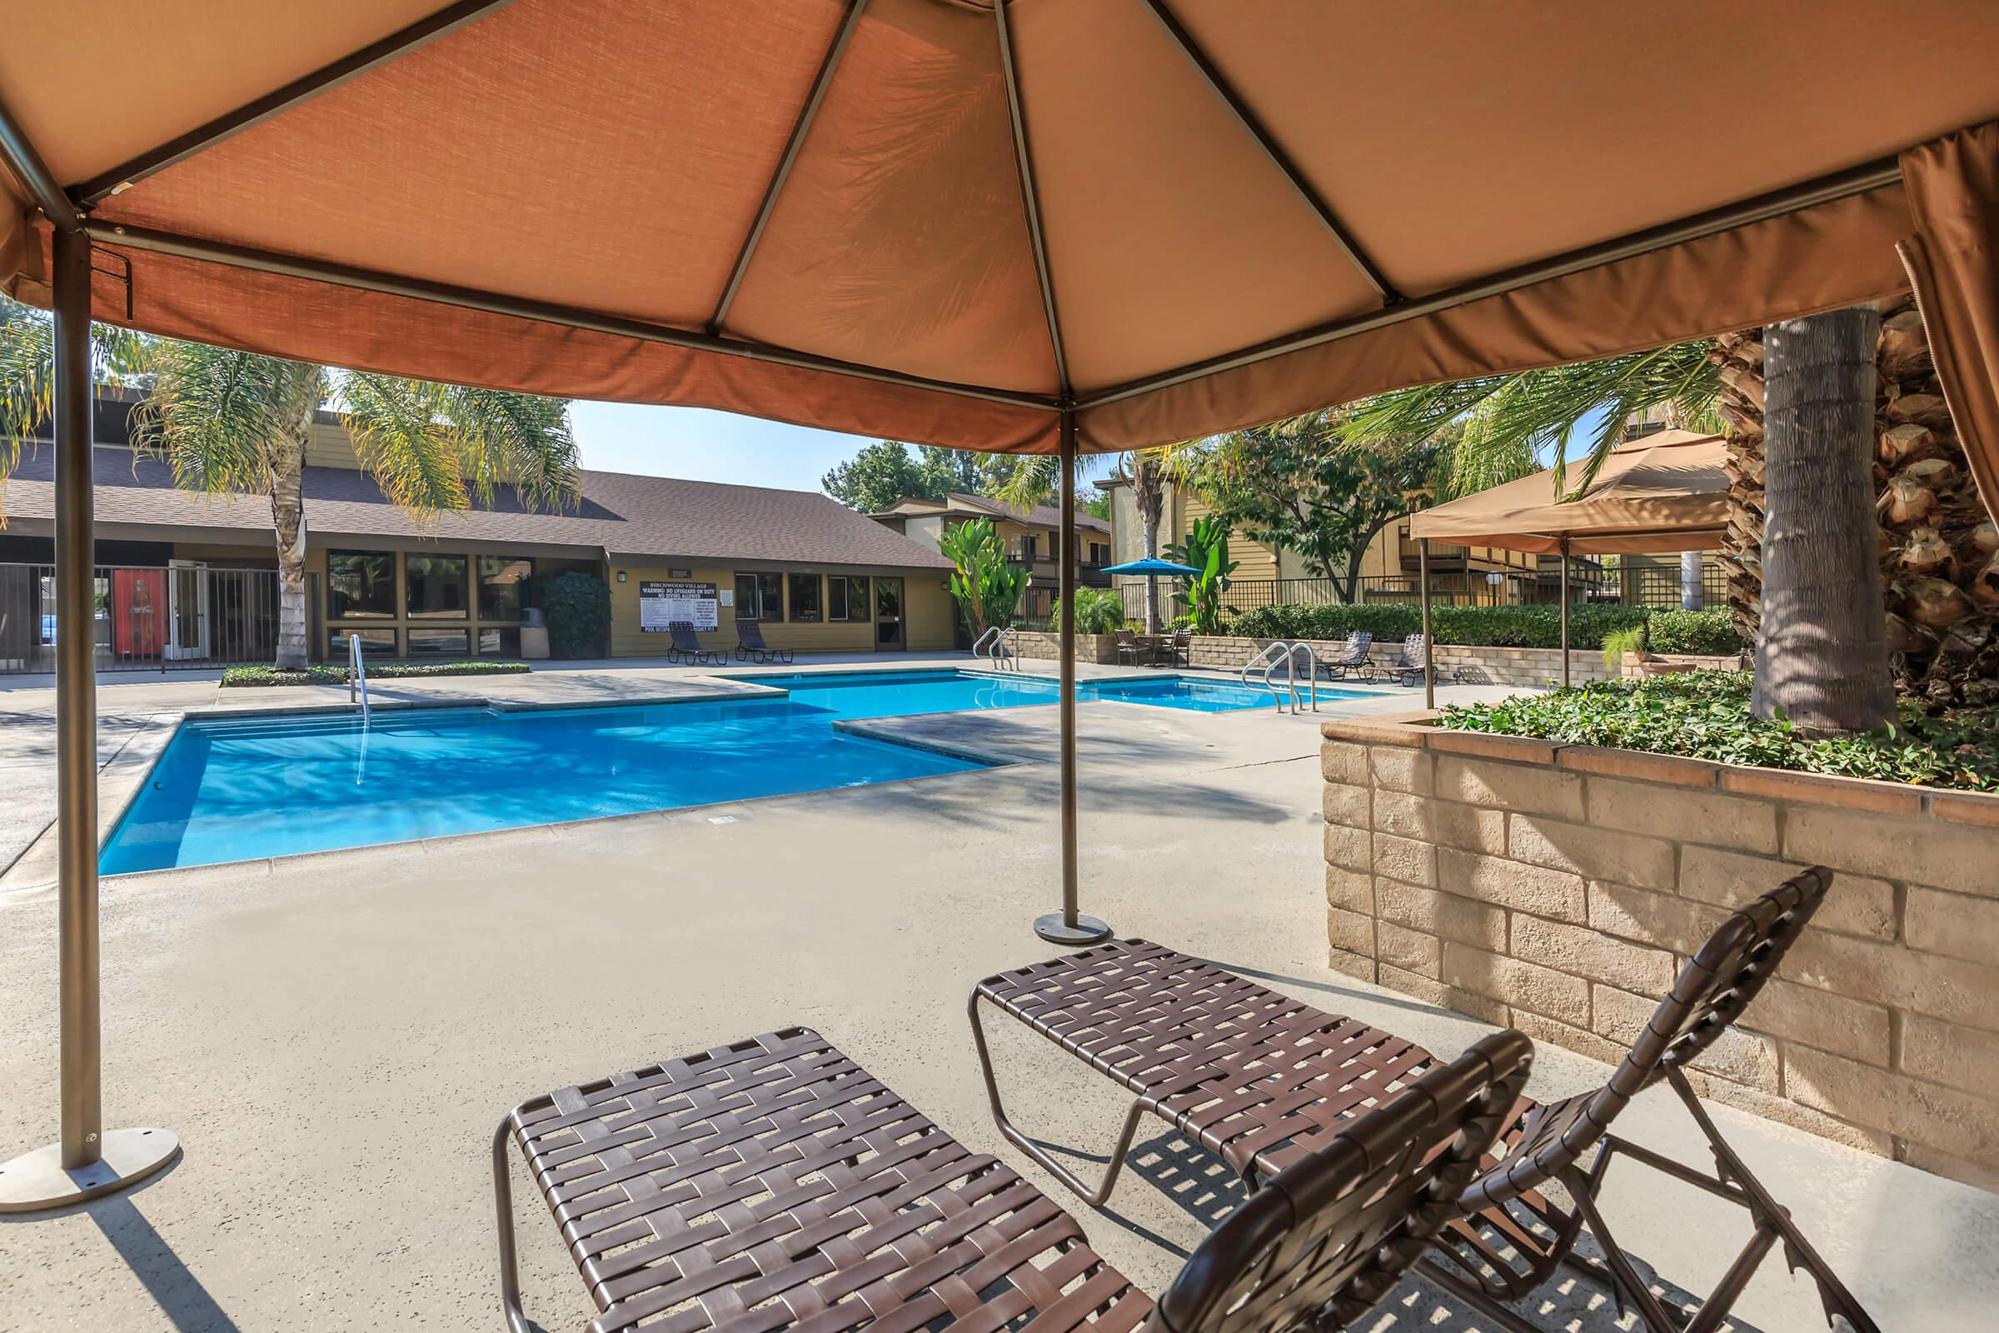 Birchwood Village Apartments community pool with chairs under a cabana